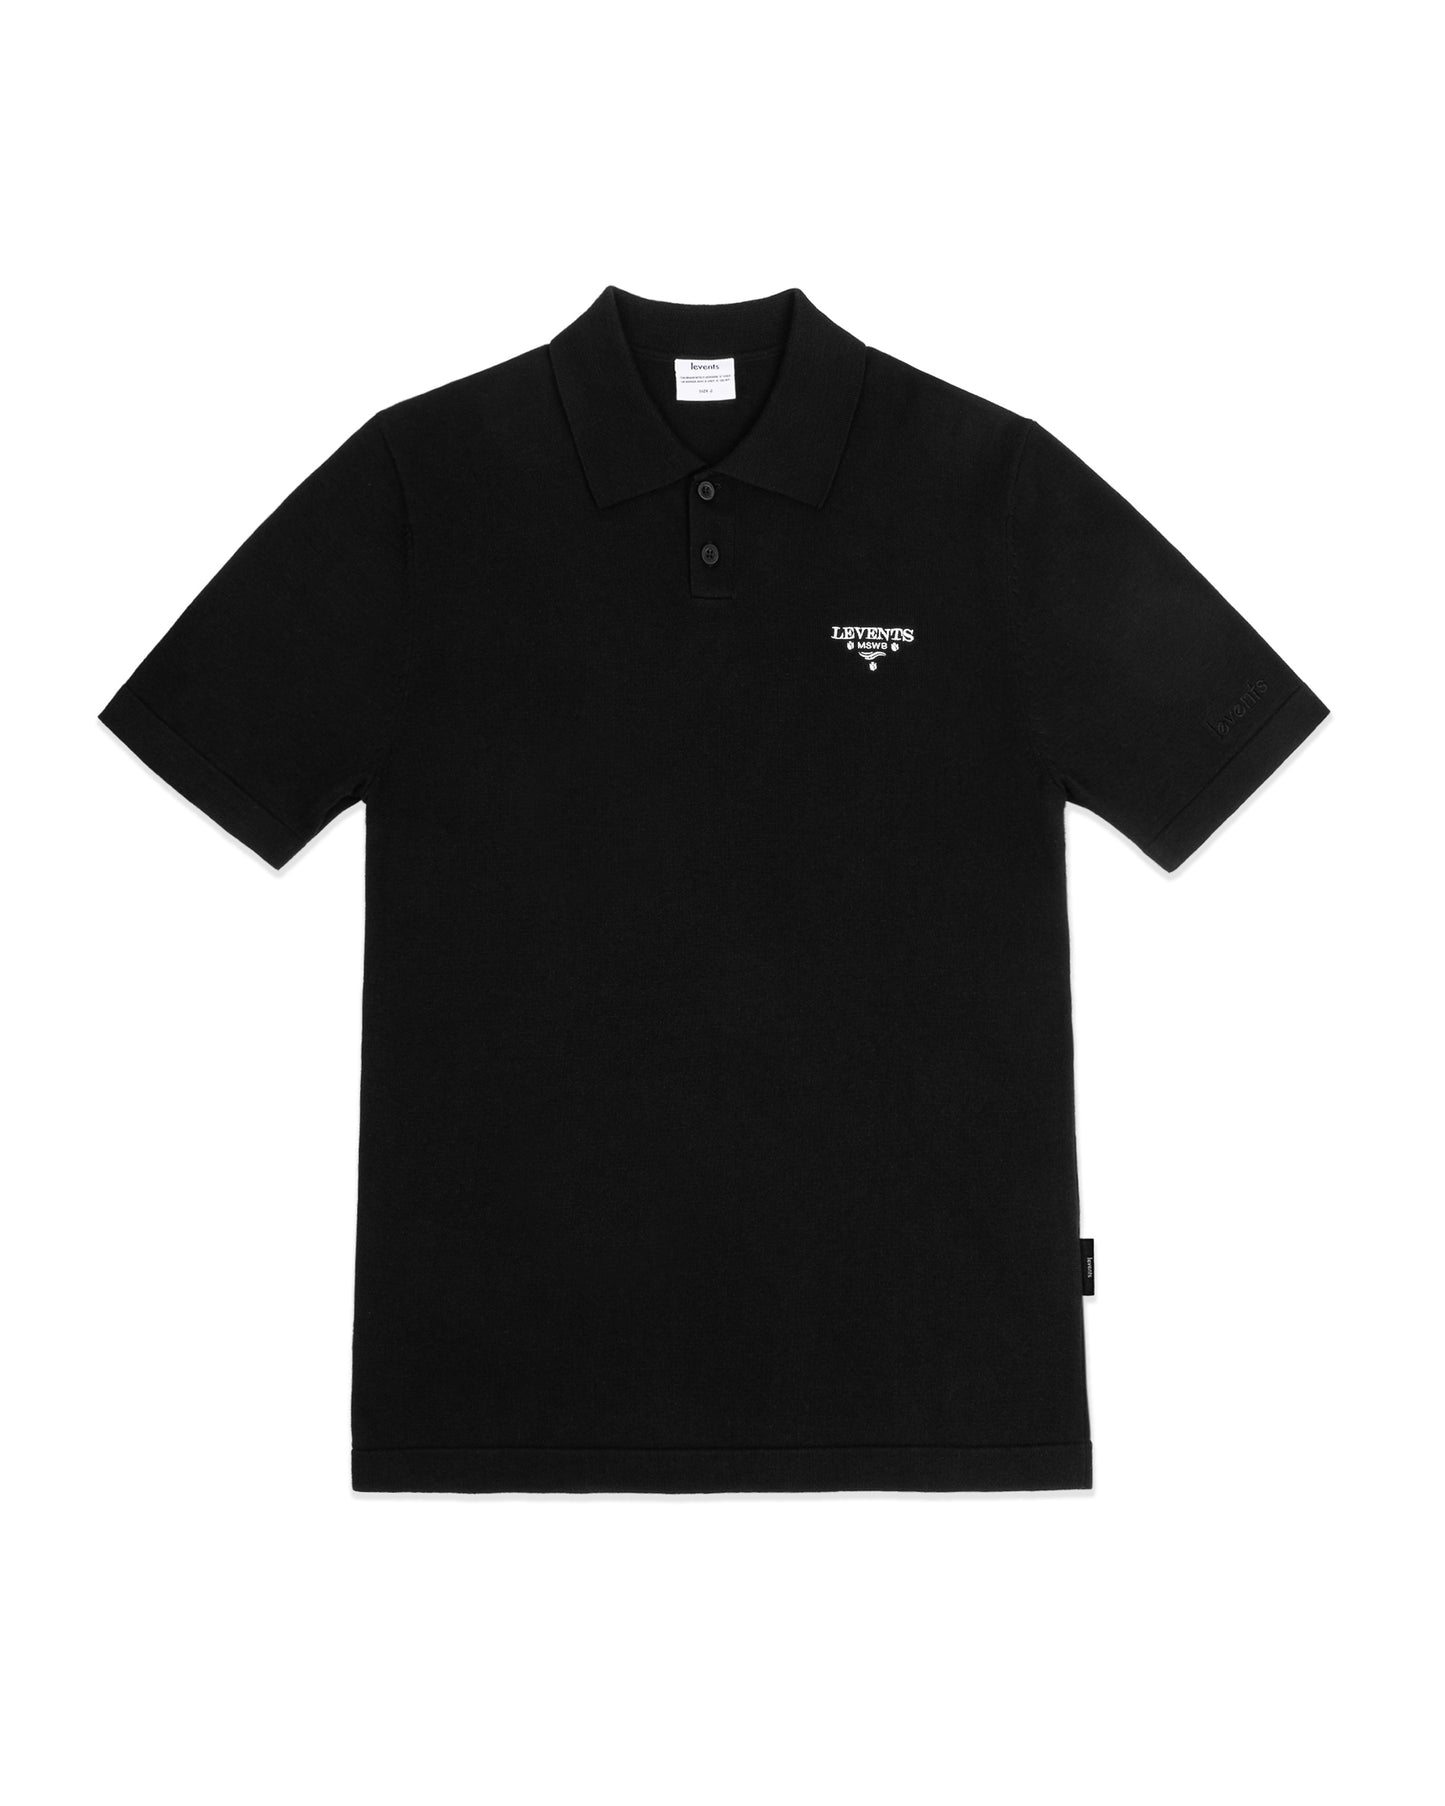 Levents® Knit Polo/ Black